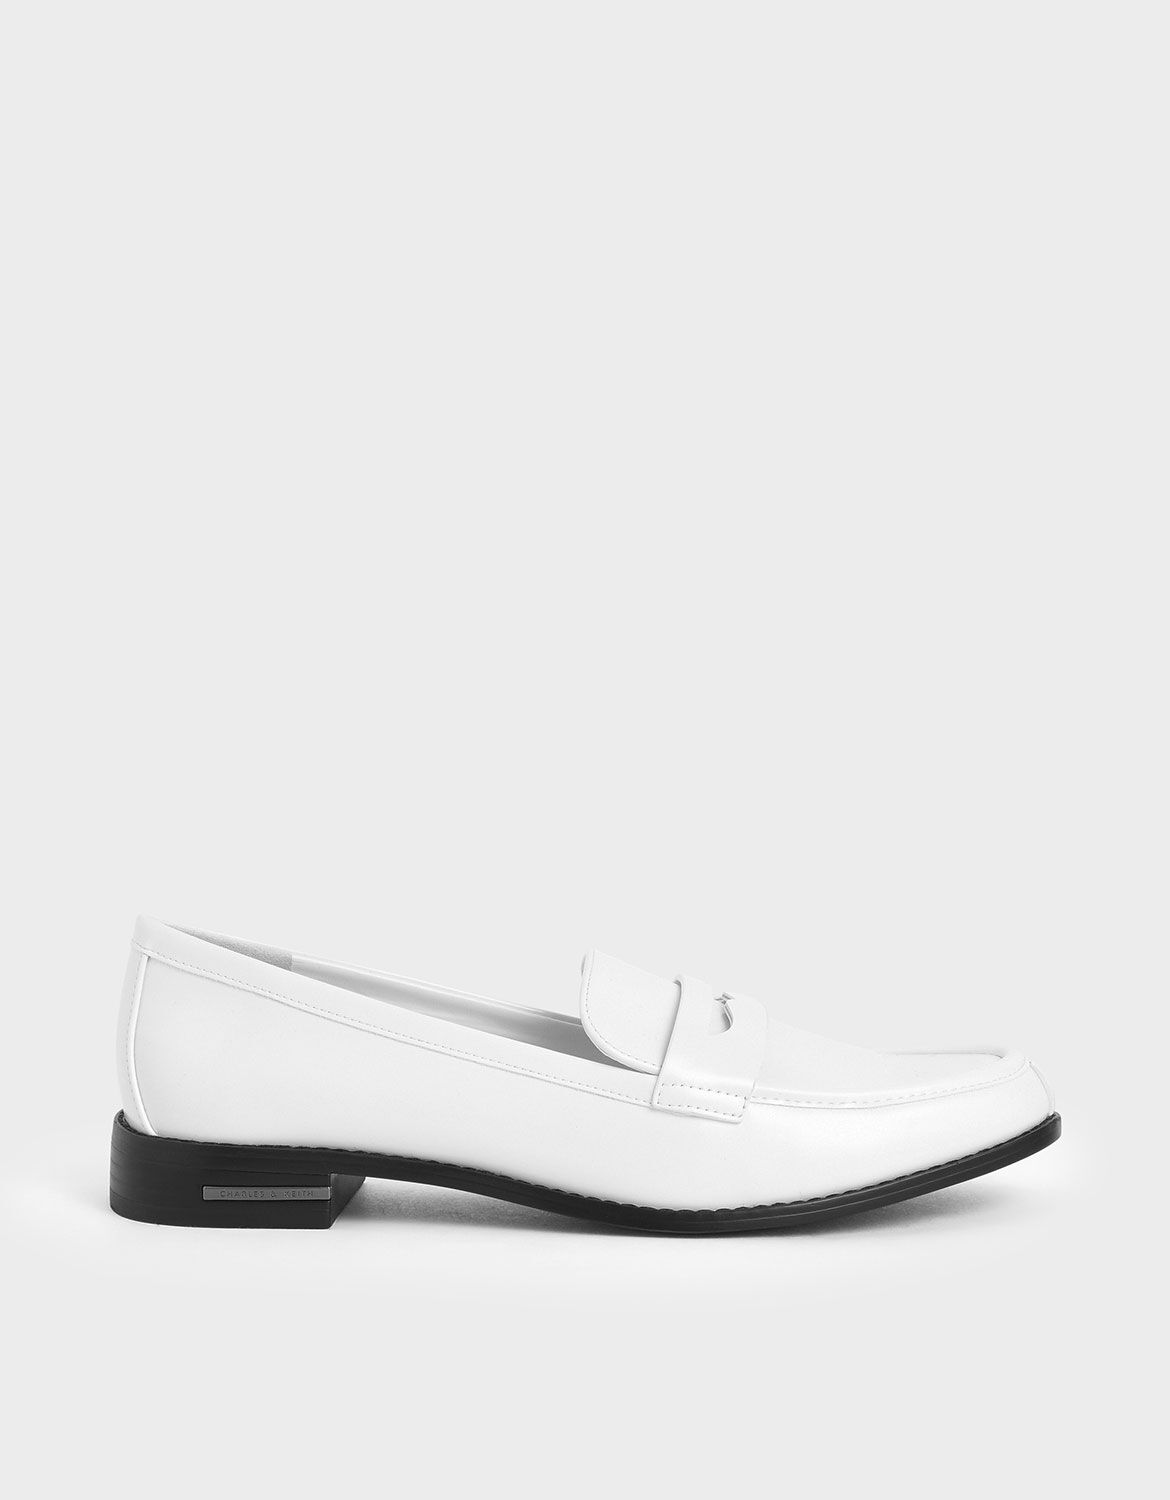 white loafer sneakers